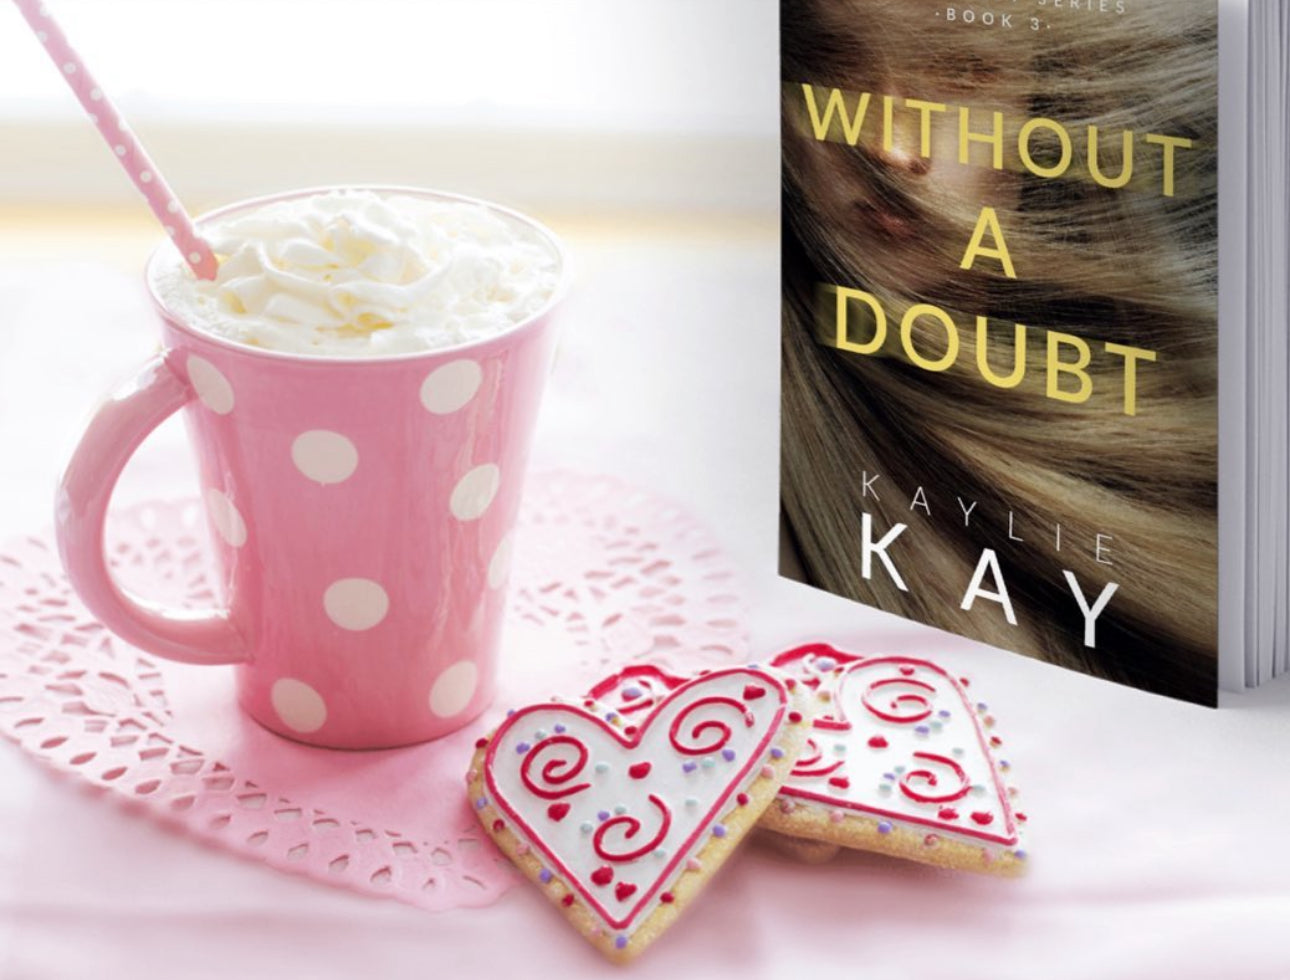 Kaylie Kay: 'Without a Doubt'